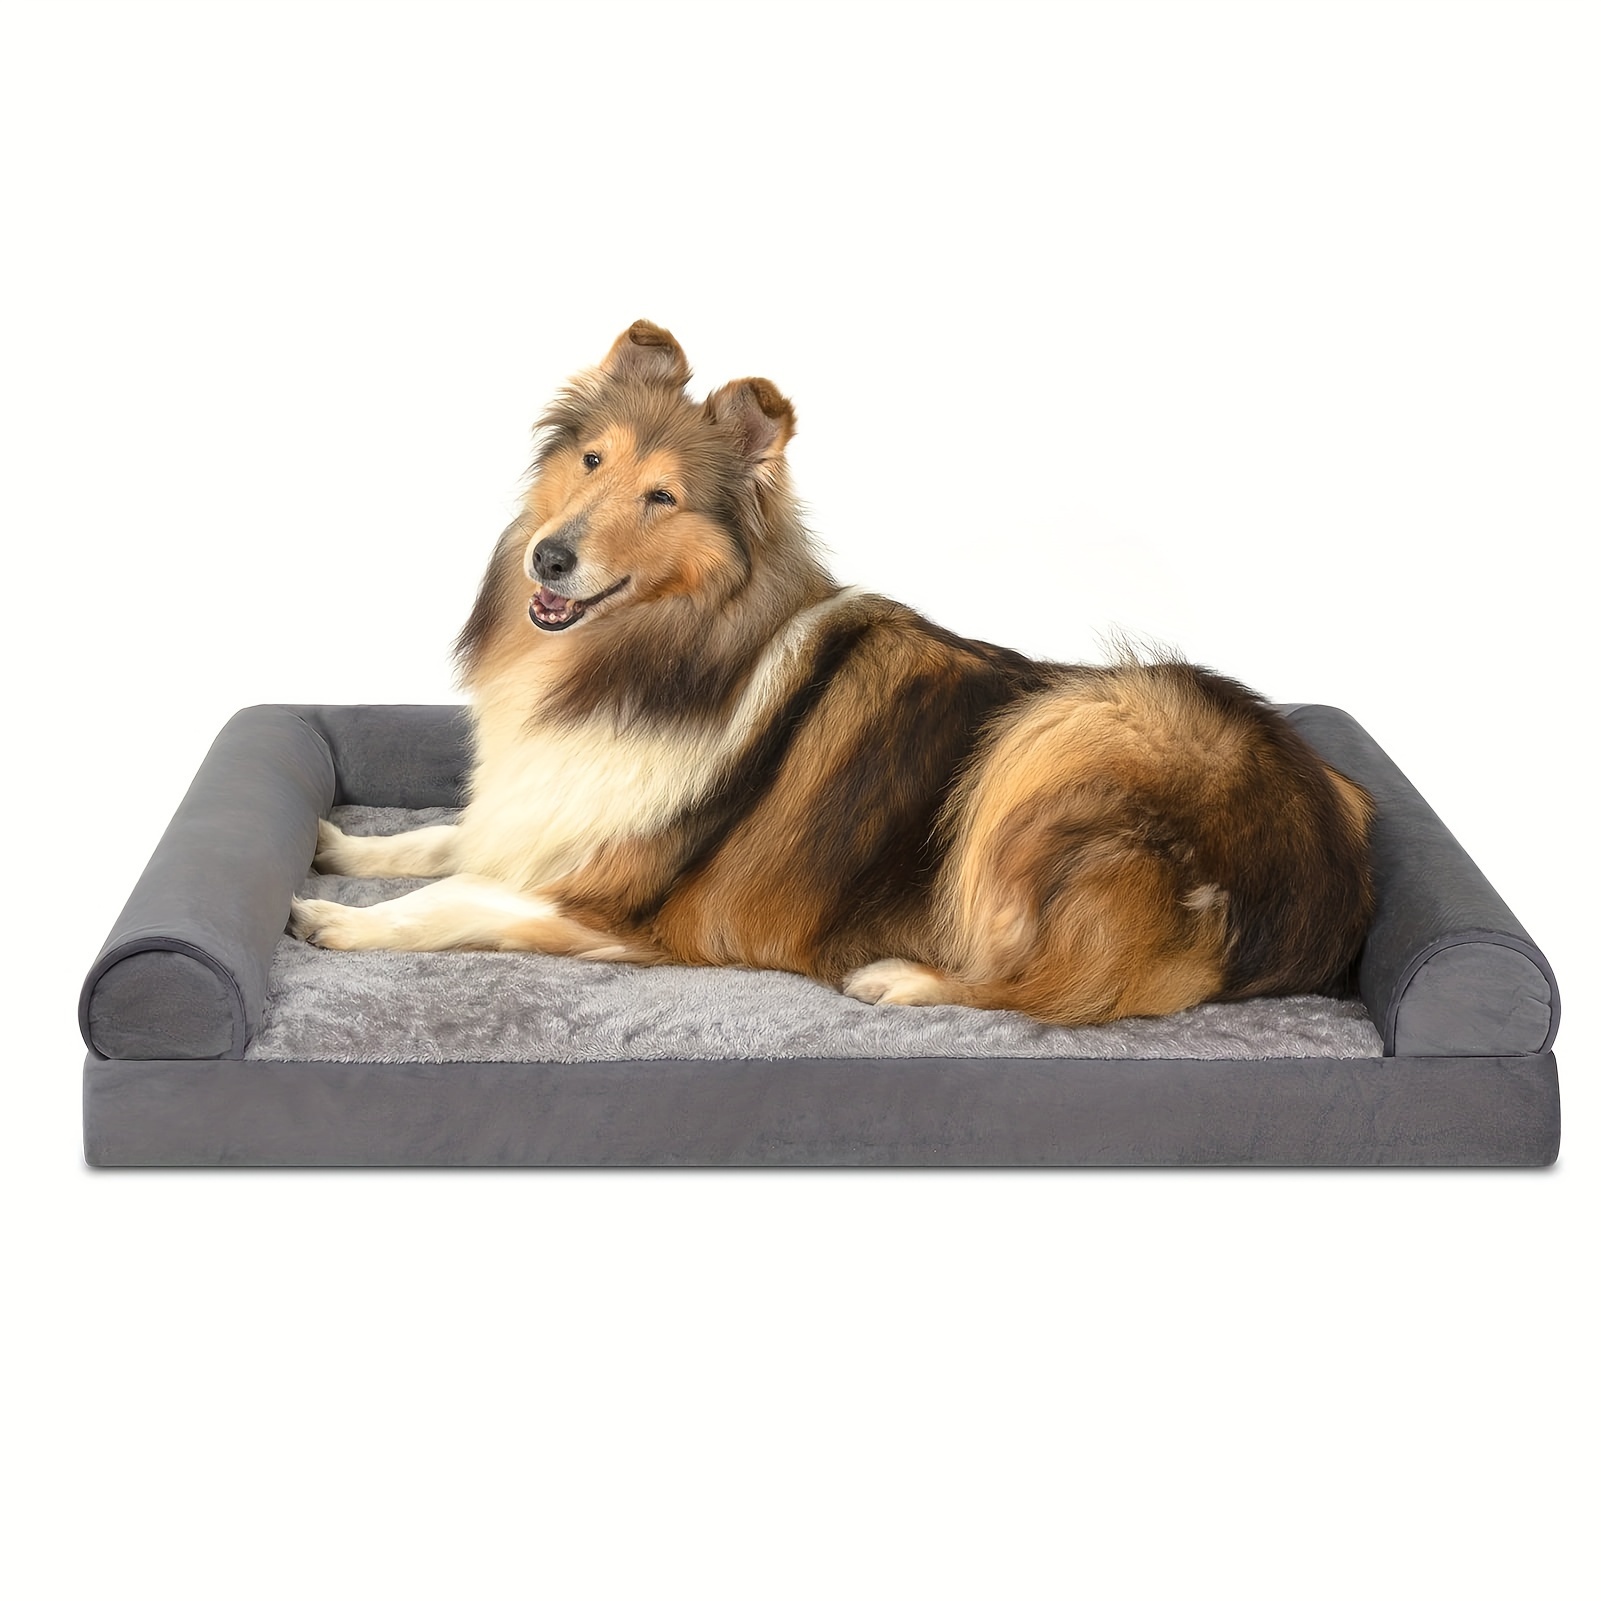 

Removable Washable Pet Sofa With High Resilience Memory Foam, Dog Bed Cat Nest, Orthopedic Dog Sofa, Suitable For Large, Medium And Small Pets